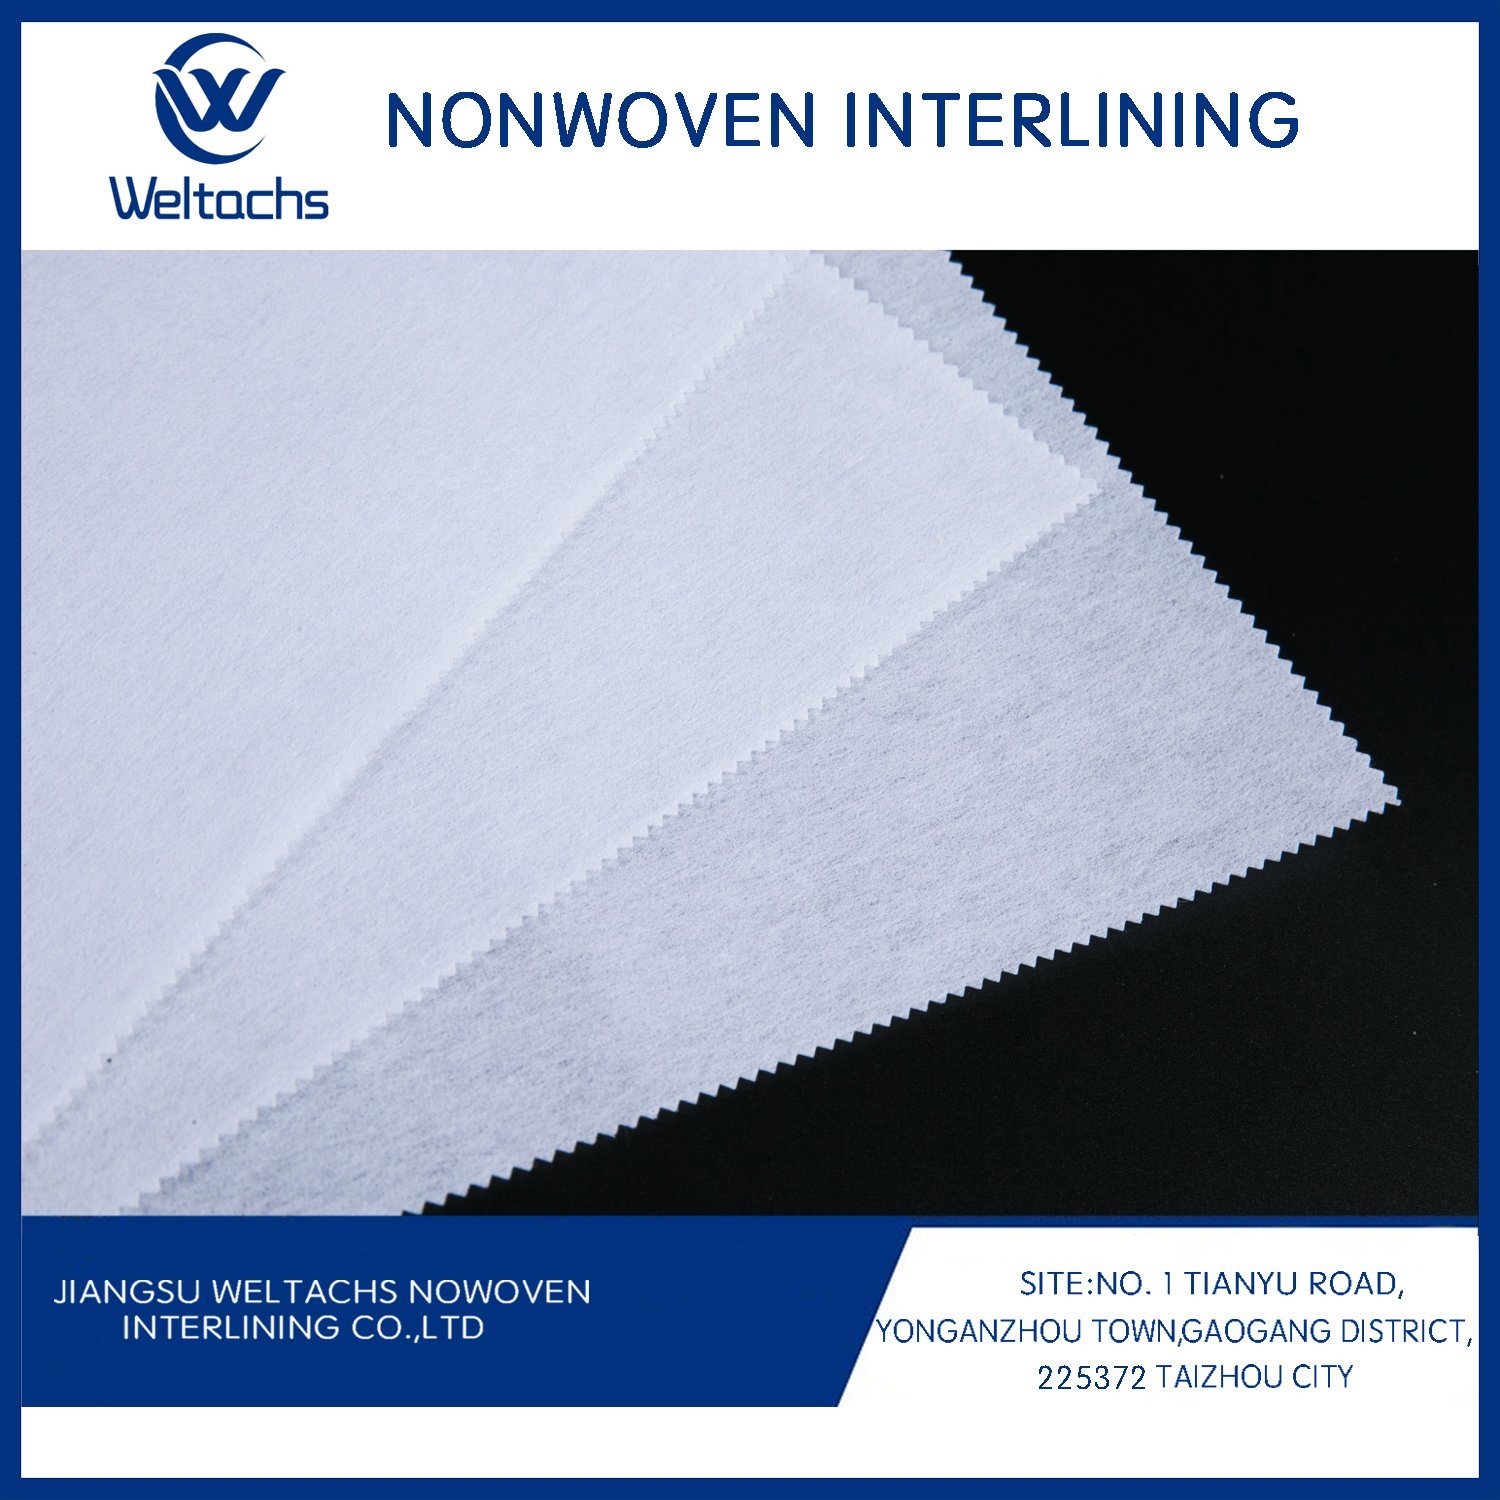 Hot Sale Dubai Magic Nonwoven Interlining PVA Hot Water Soluble Paper Dissolving in Water After Embroidery for Pakistan Market